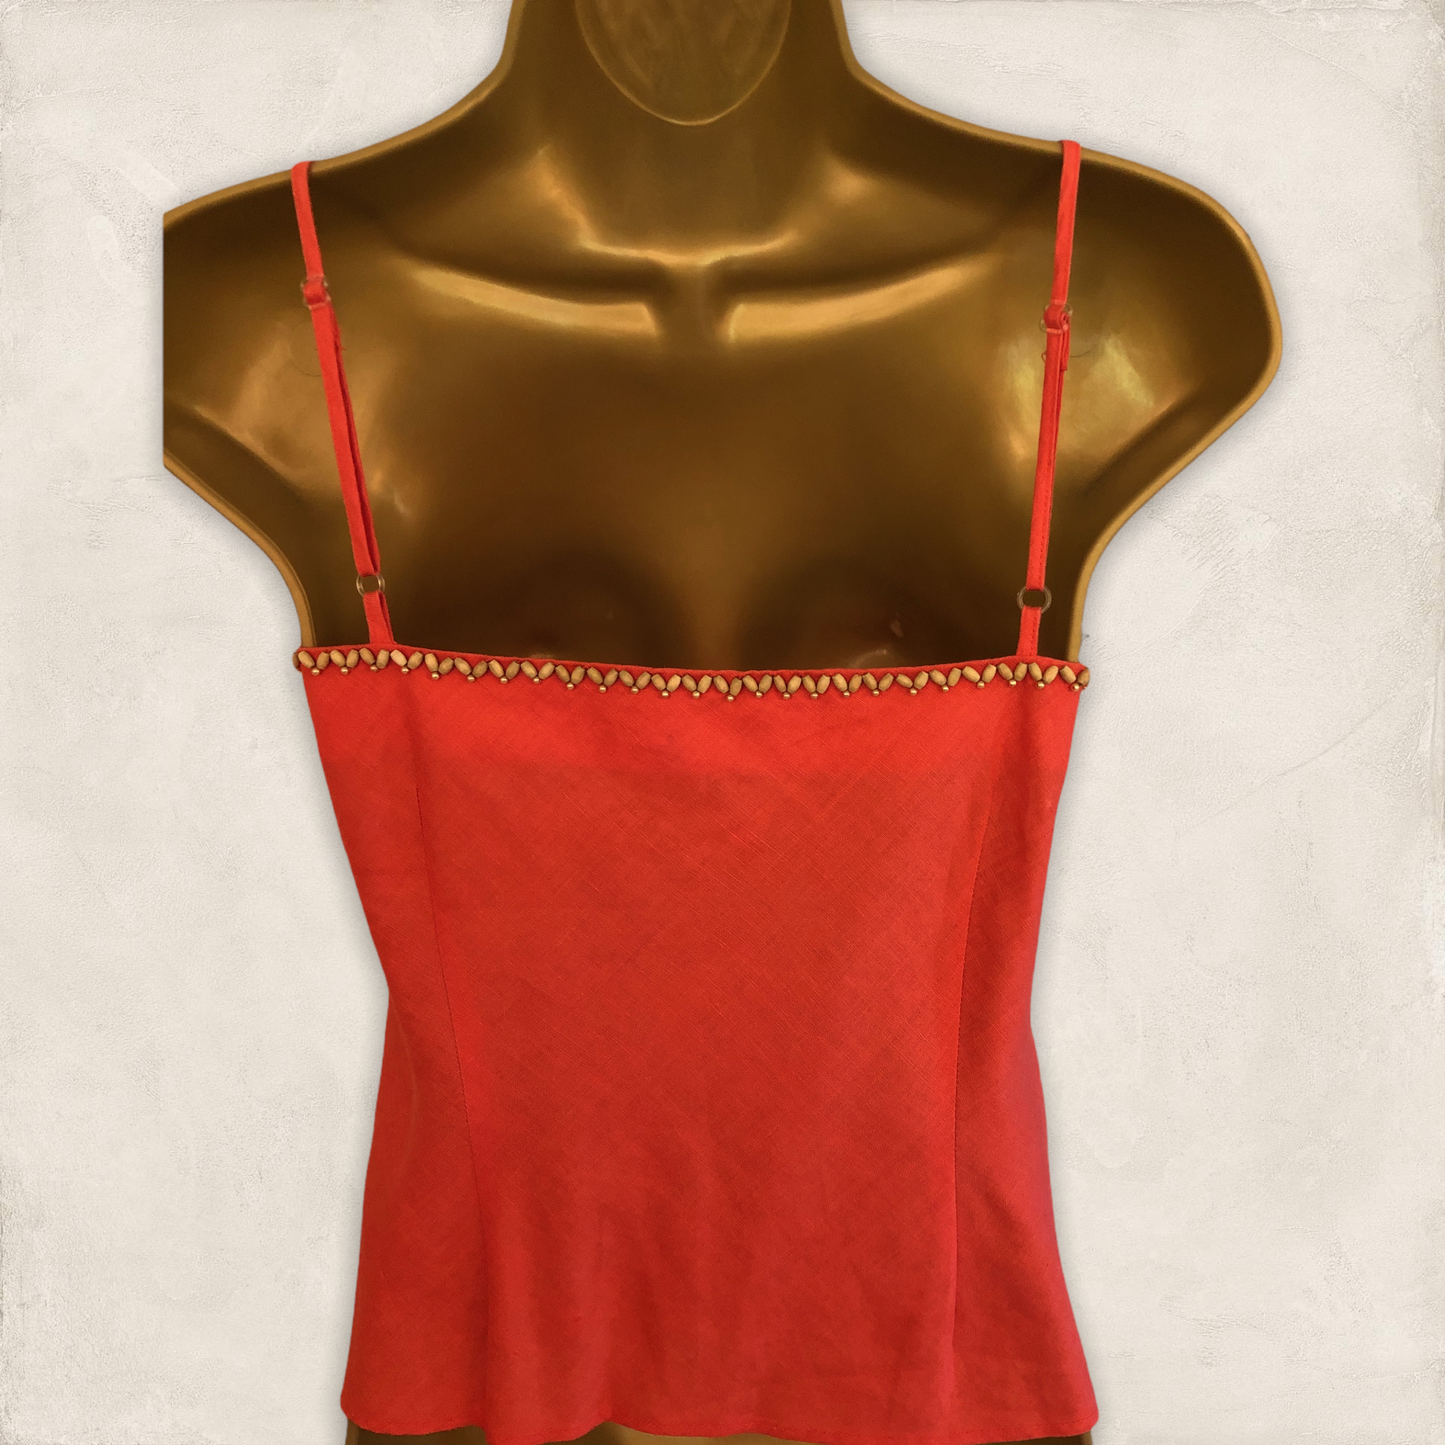 Derhy Coral Linen Beaded Cami Top Size M UK 10 US 6 EU 38 Timeless Fashions